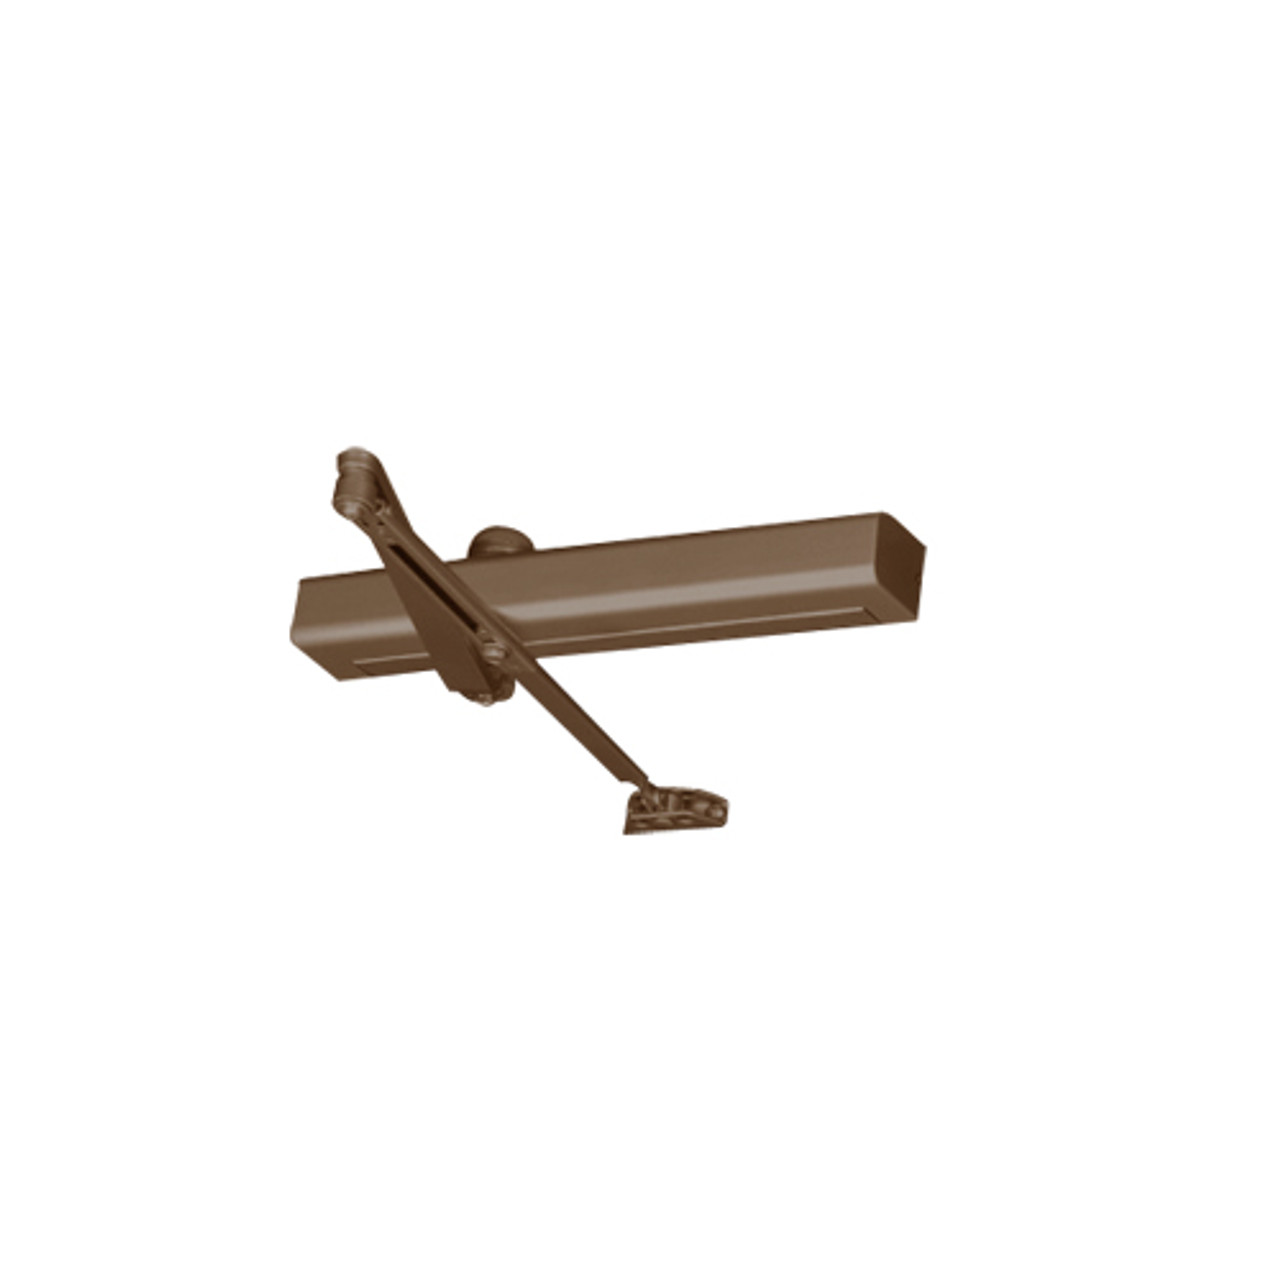 J8301H-691 Norton 8000 Series Hold Open Door Closers with Top Jamb Reveal 2-3/4 to 6-3/4 inch in Dull Bronze Finish